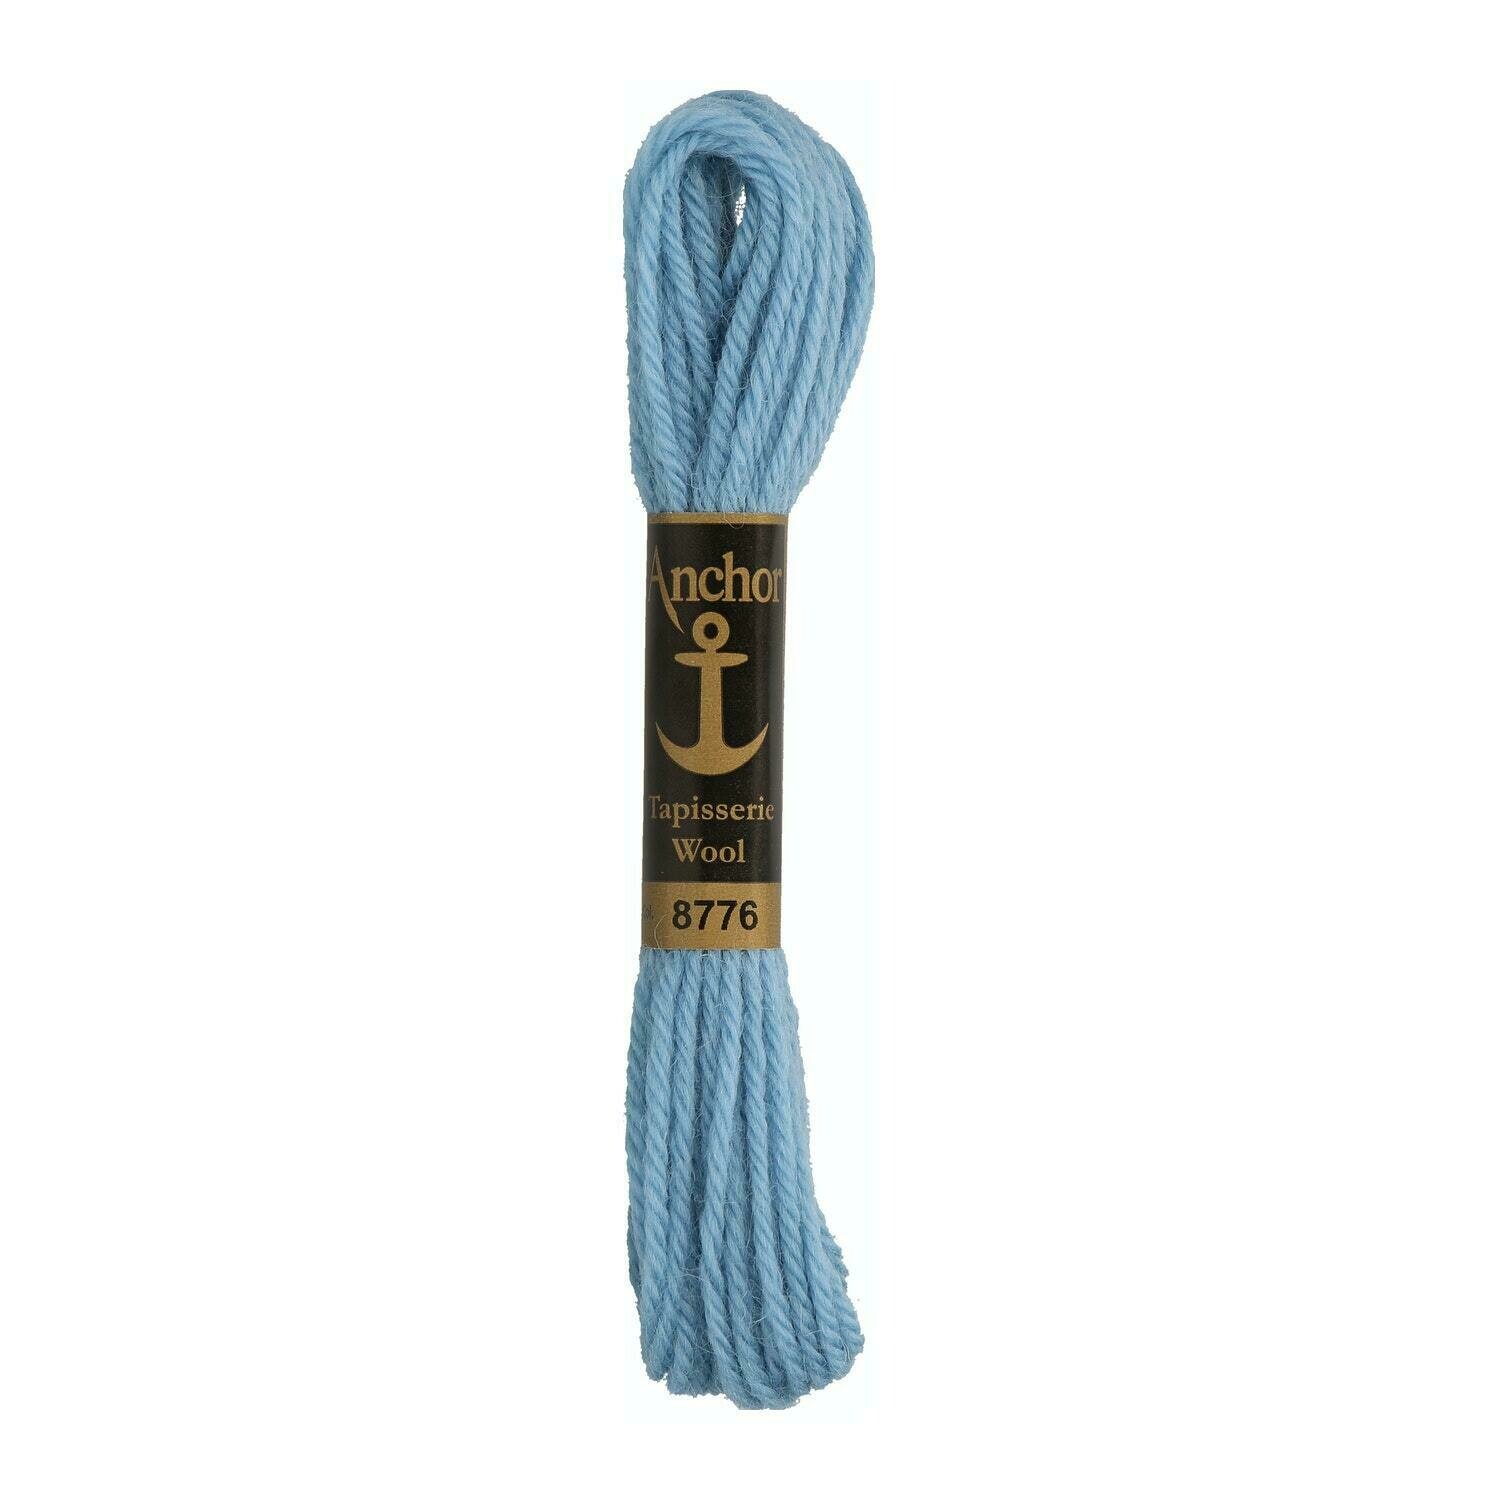 Anchor Tapisserie Wool #08776